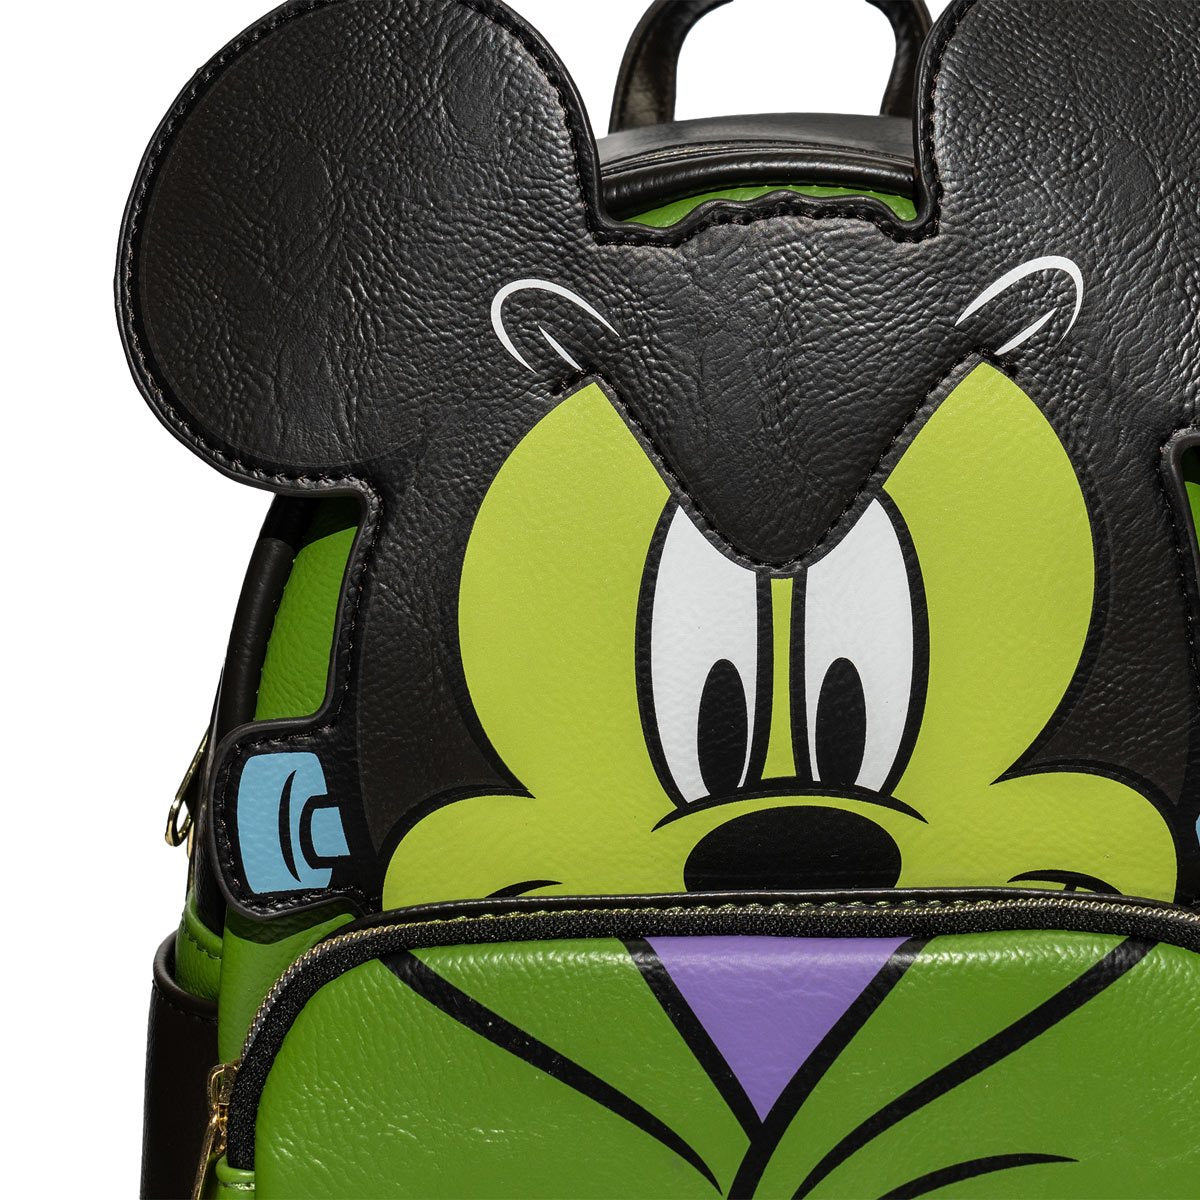 Loungefly Disney Mickey Mouse Frankenstein Cosplay Mini Backpack